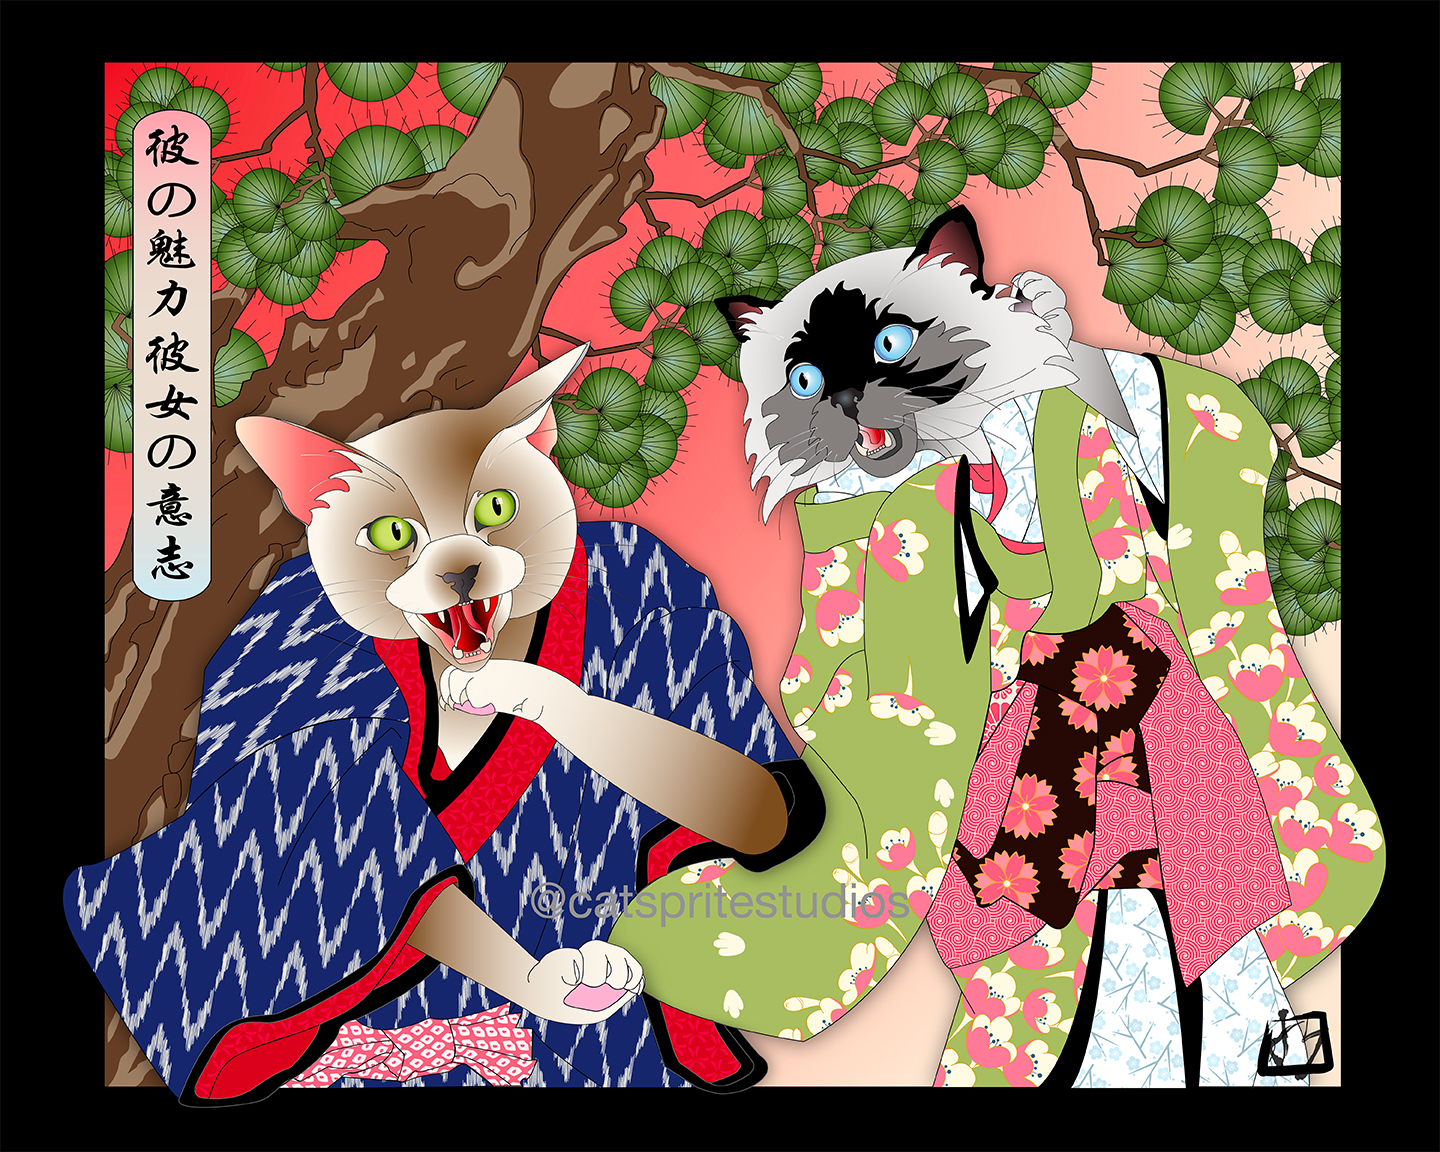 They want to kiss, but will they? Text asks: Will he charm her? (After Utagawa Kunisada)